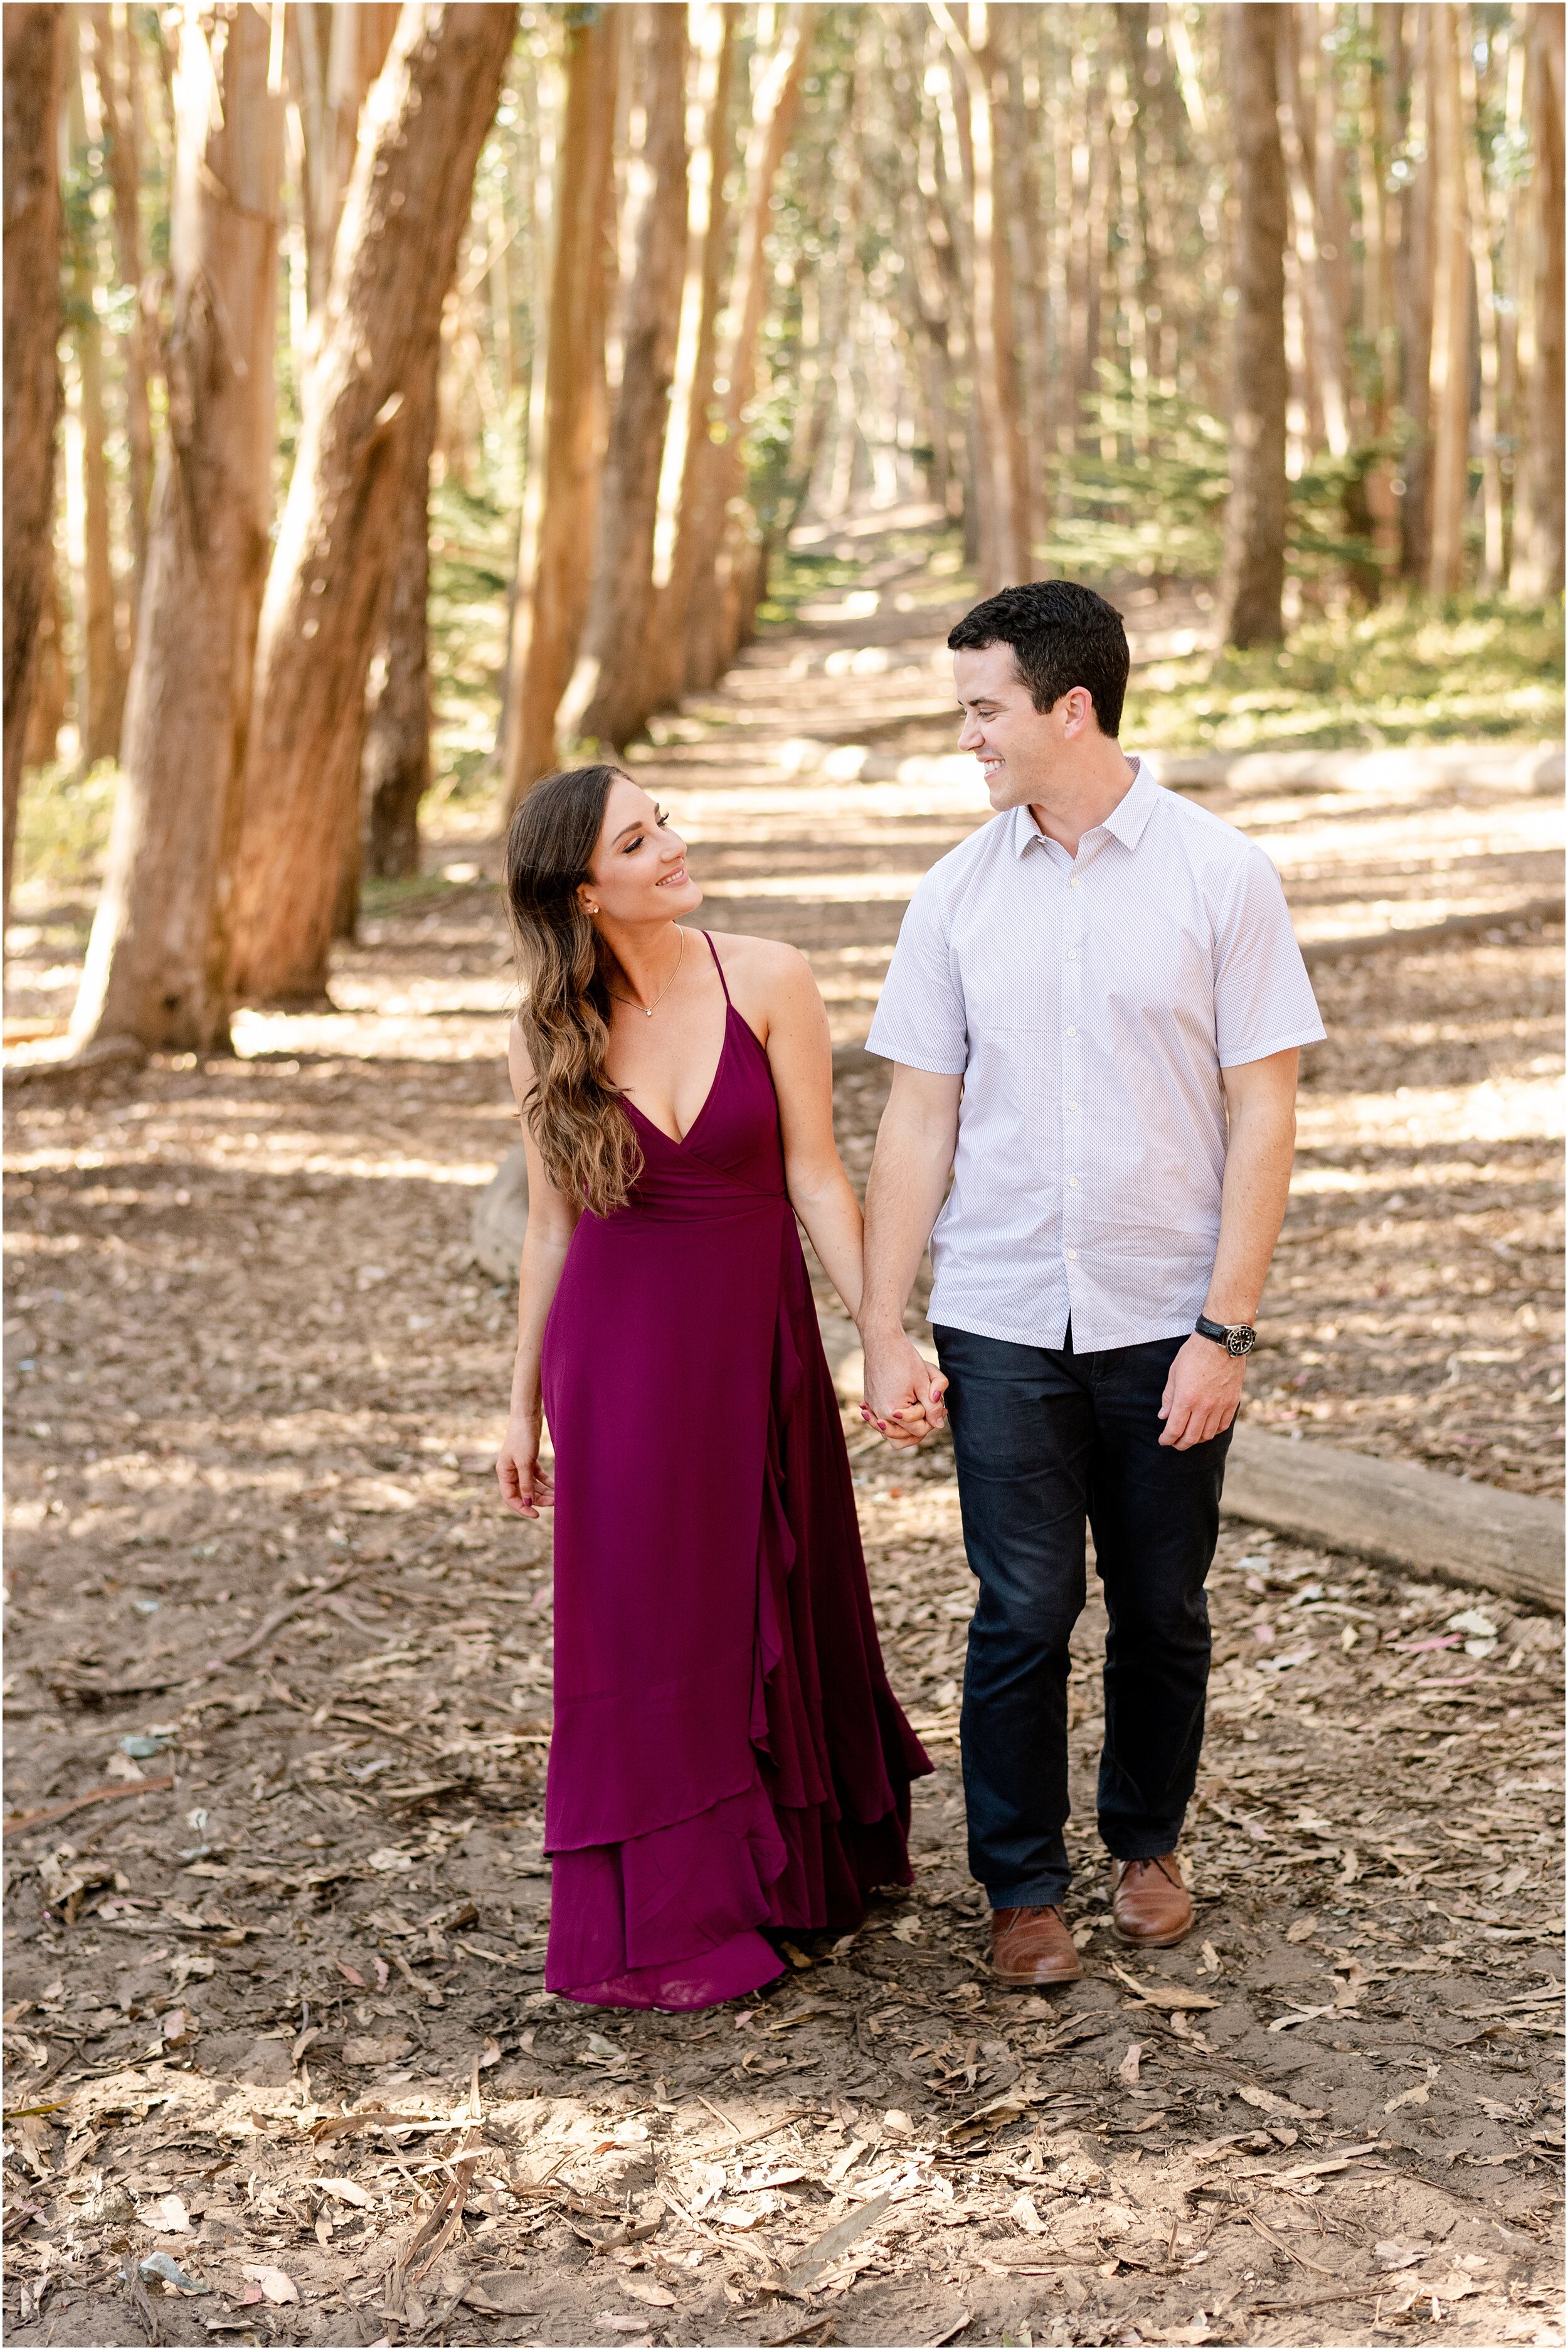 hannah leigh photography Baker Beach, Lovers Lane. Palace of Fine Arts Engagement Session San Franscico, CA_4835.jpg